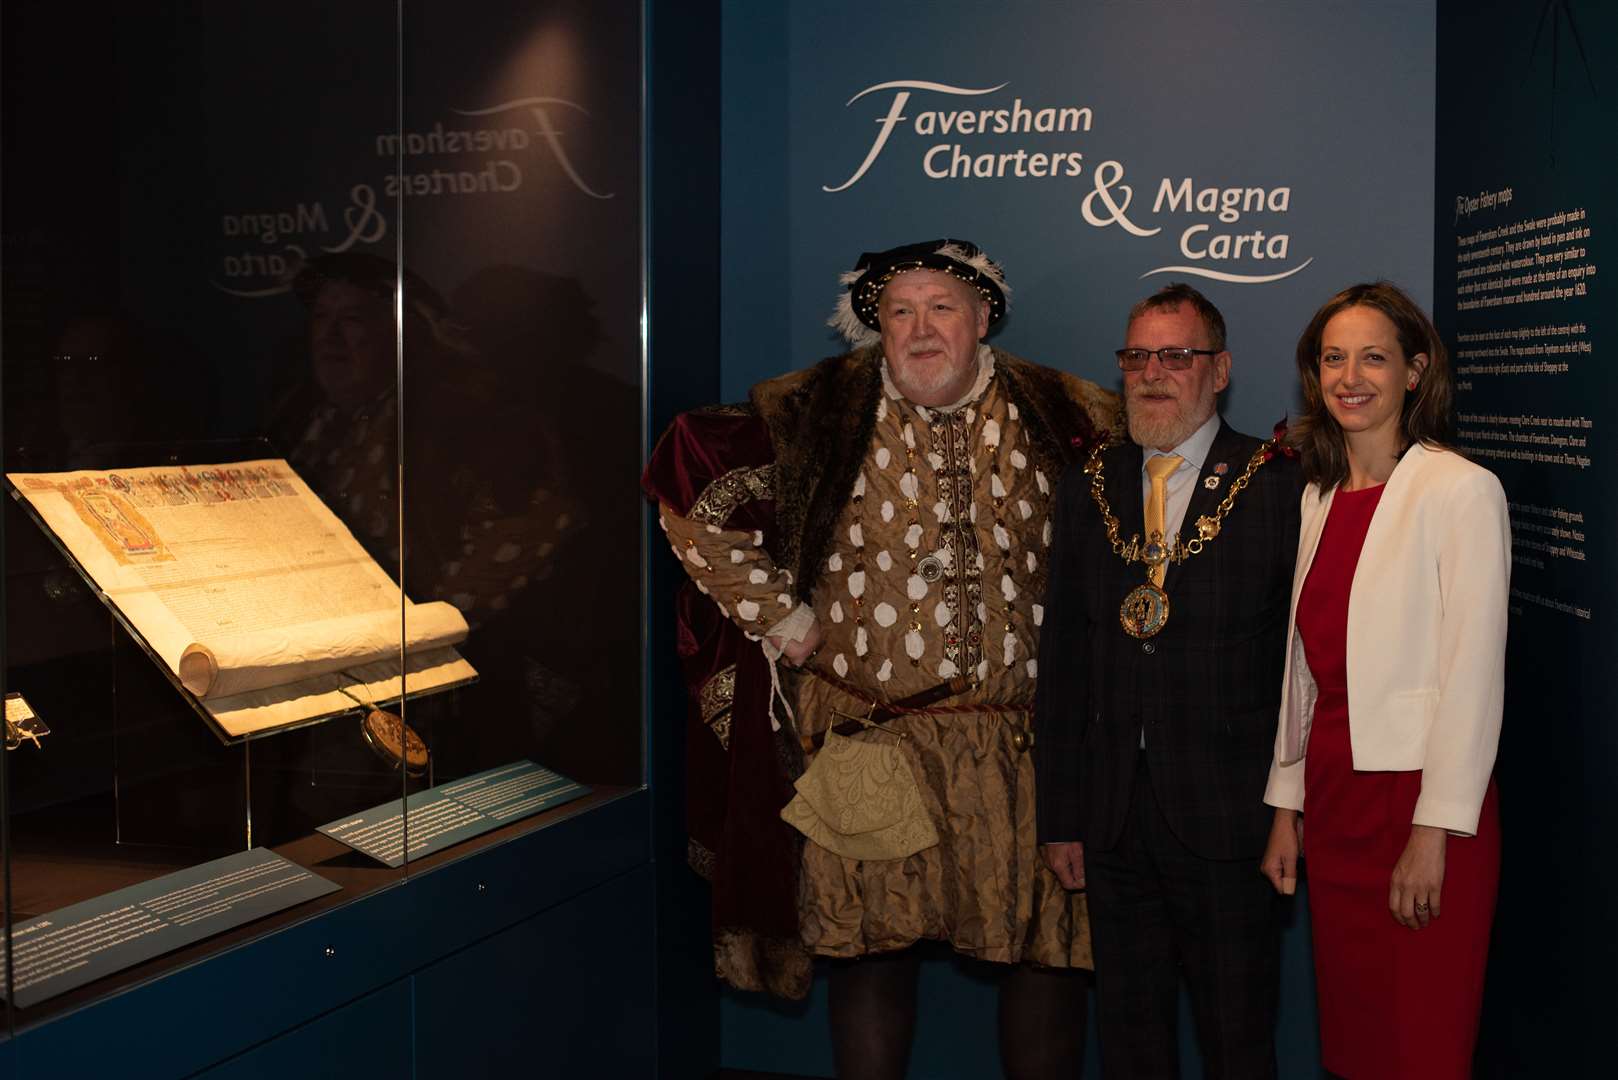 The launch of the exhibition at Town Hall with the Mayor of Faversham Cllr Trevor Martin and MP Helen Whately